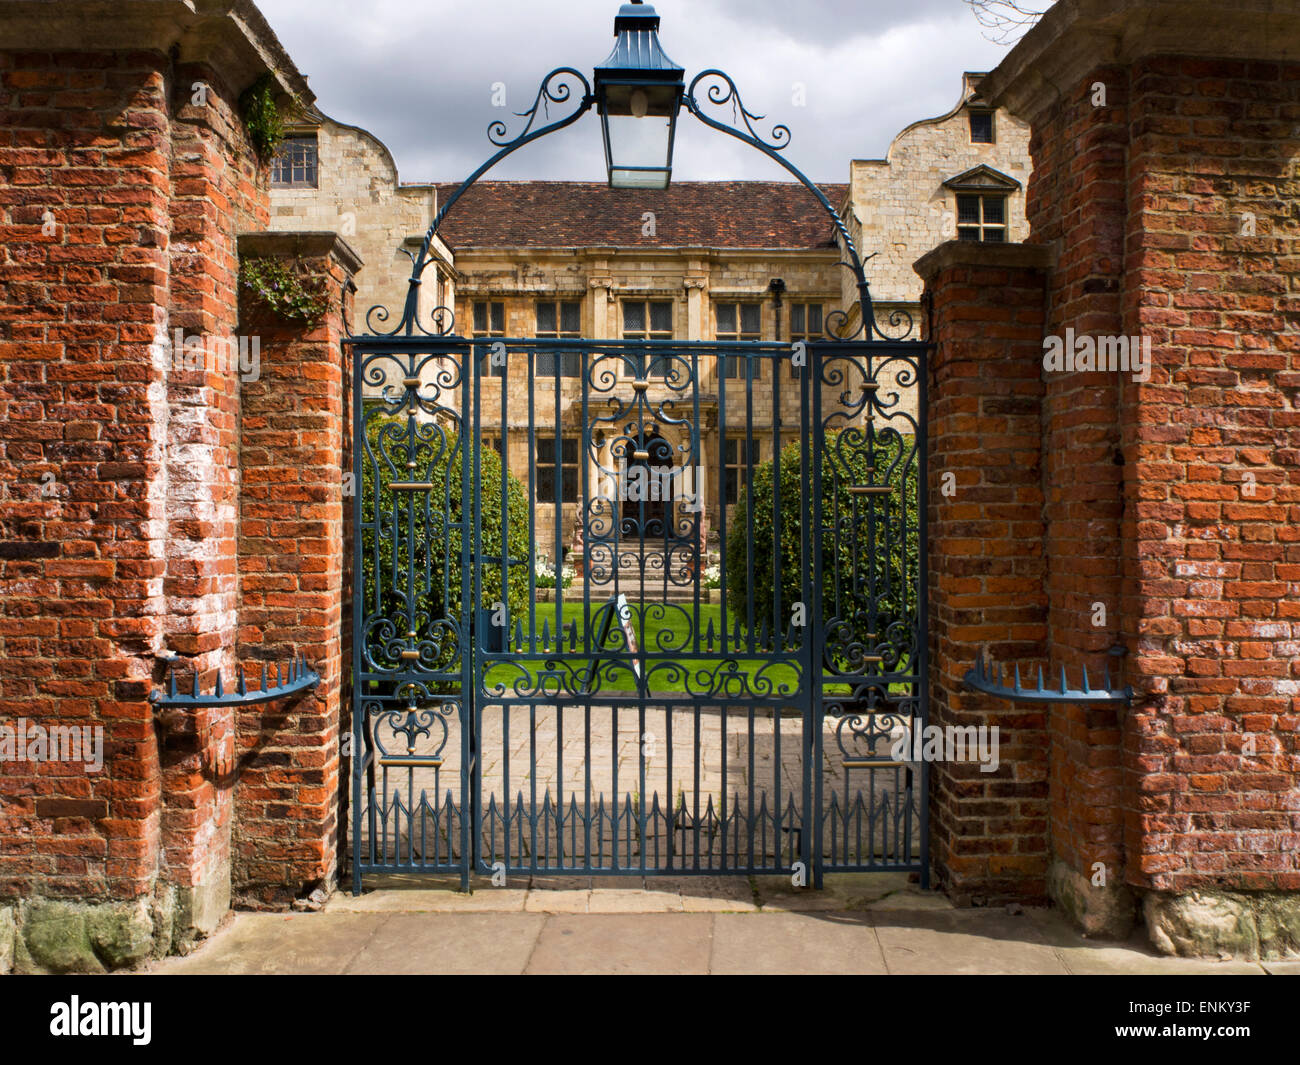 The Treasurers House Gate from Minster Yard in York Yorkshire England Stock Photo